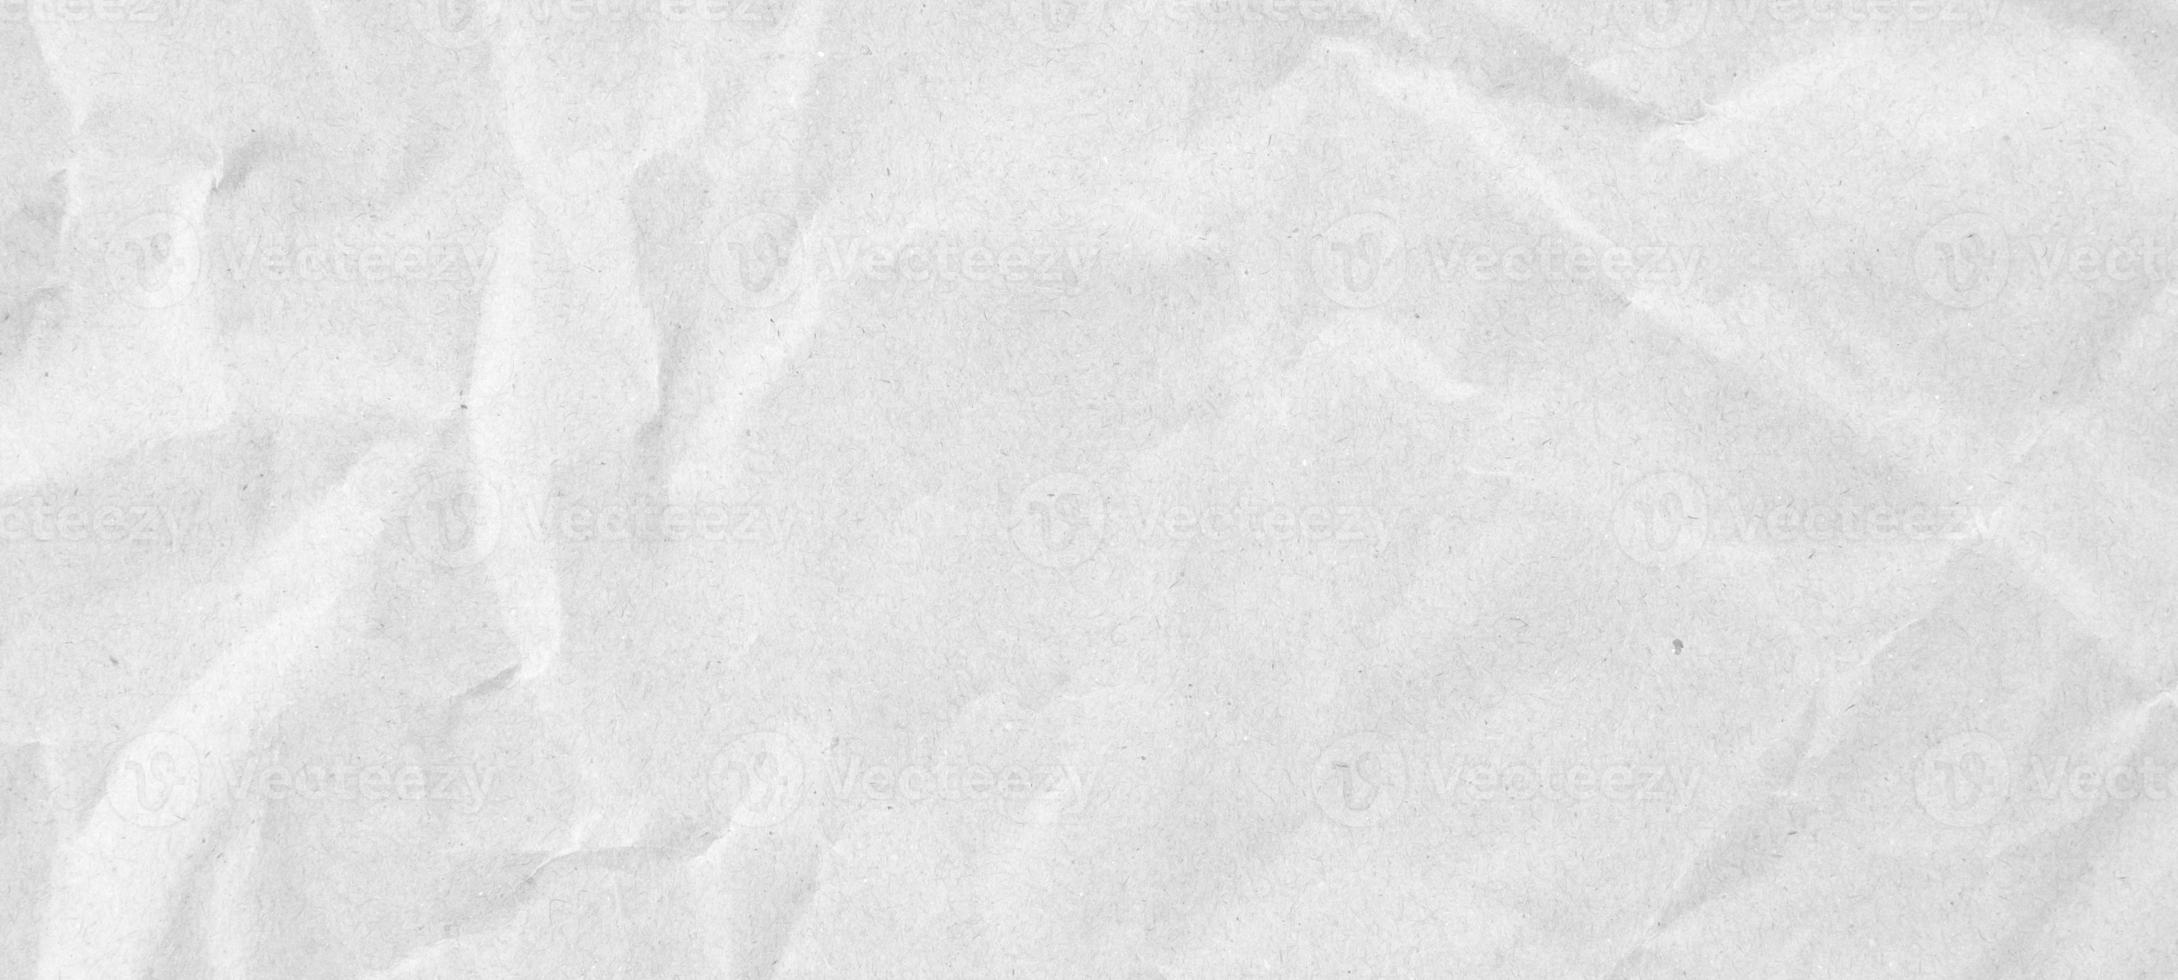 Abstract white crumpled and creased recycle paper texture background photo